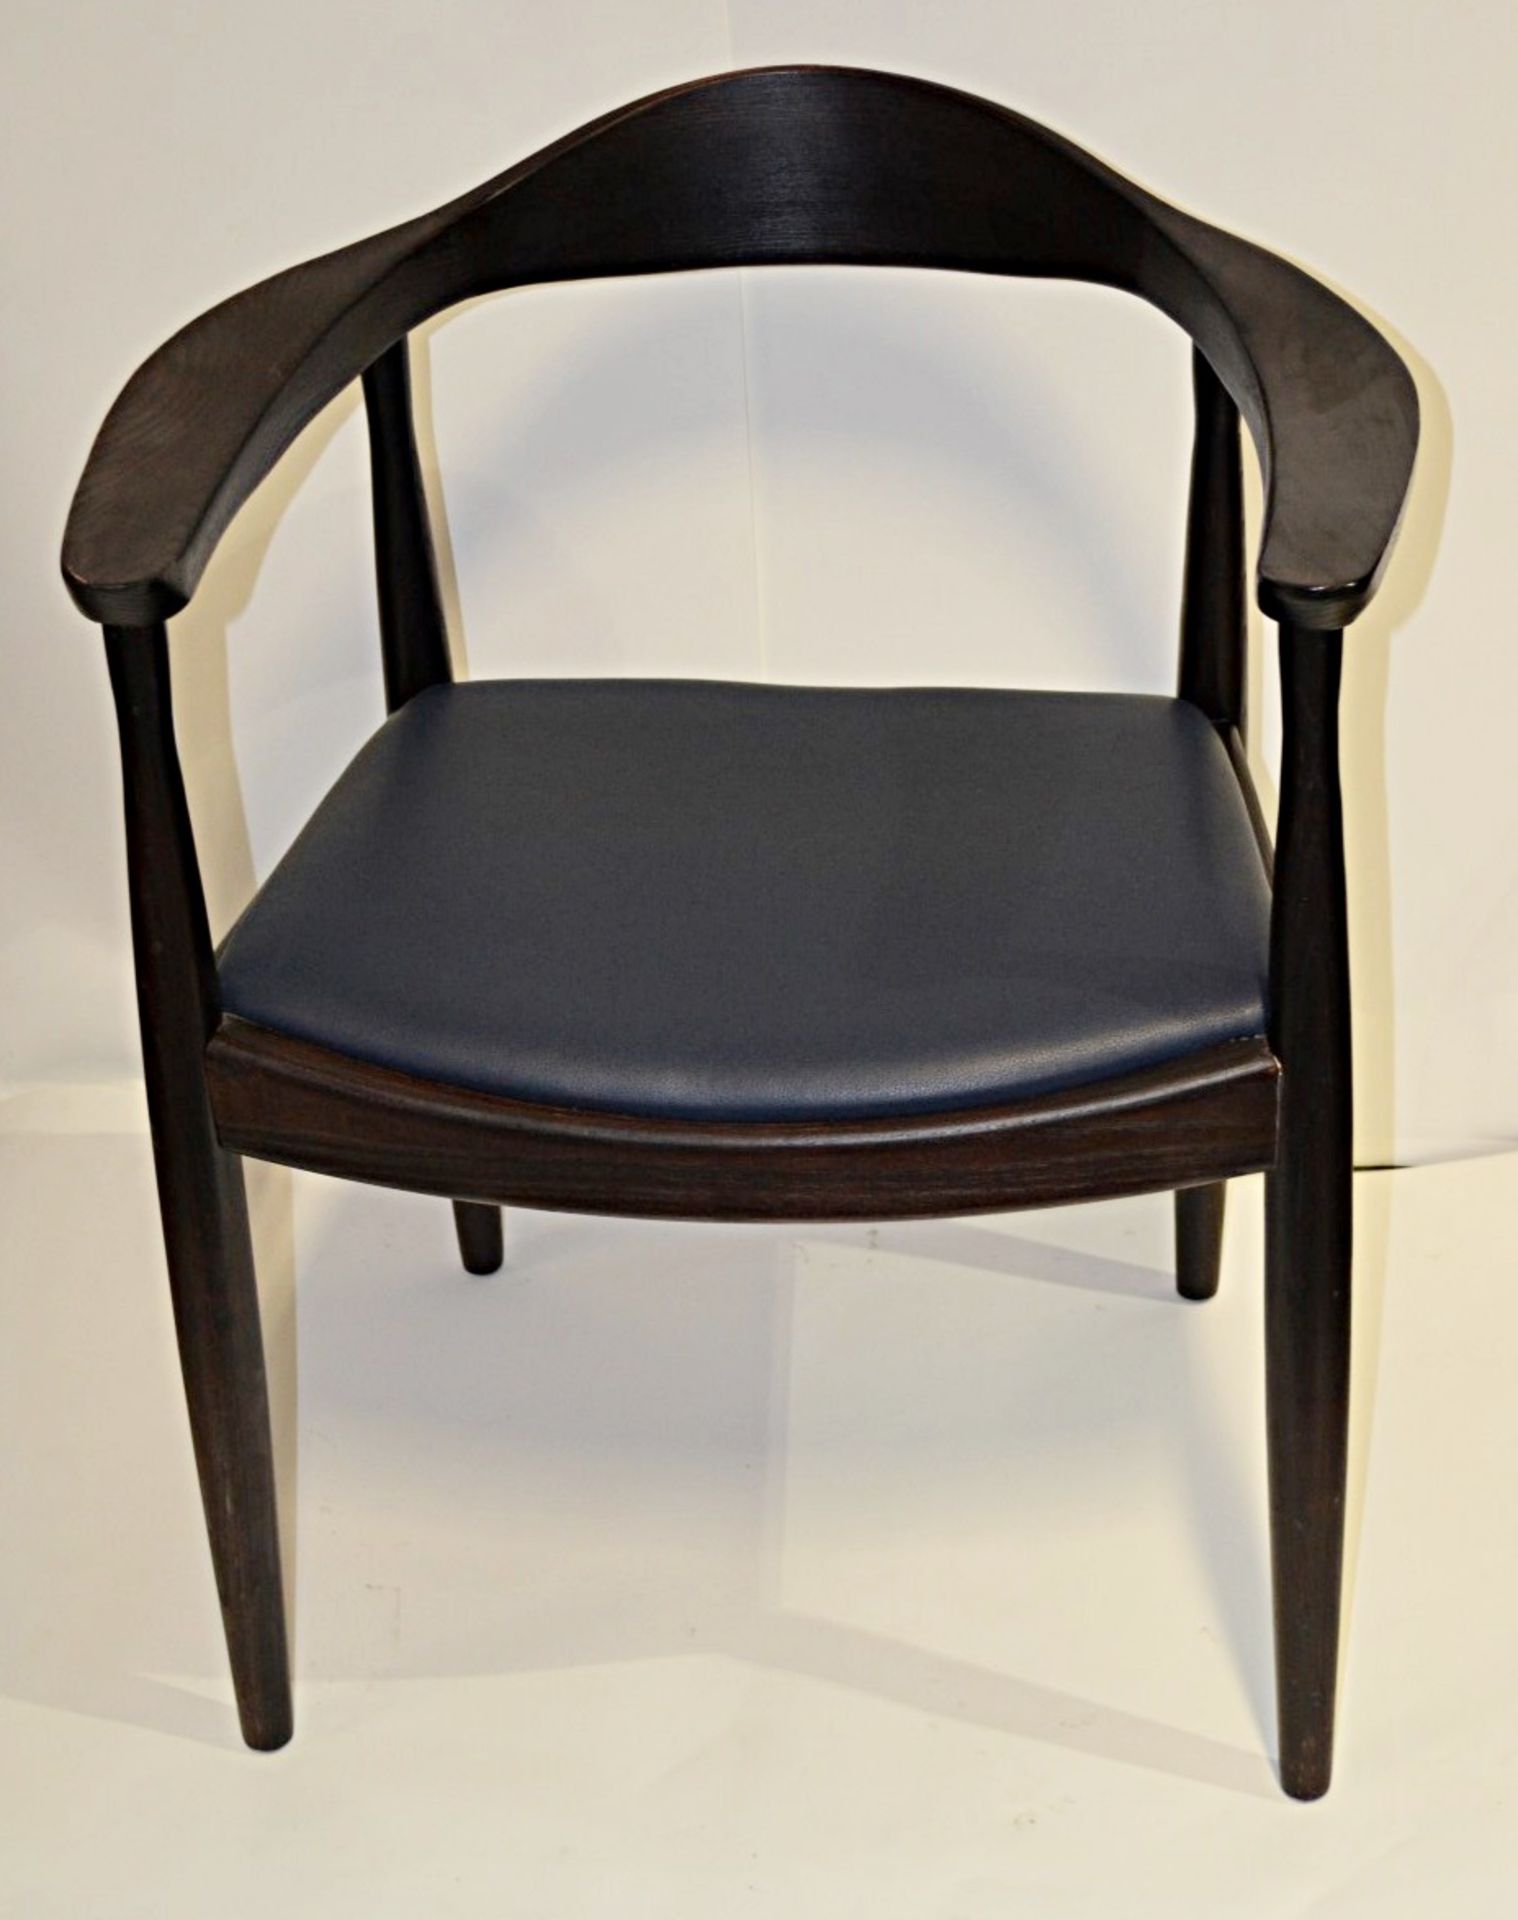 4 x Wooden Restaurant Dining Chairs - Ash Wood Dining Chairs With Dark Finish and Leather - Image 2 of 4